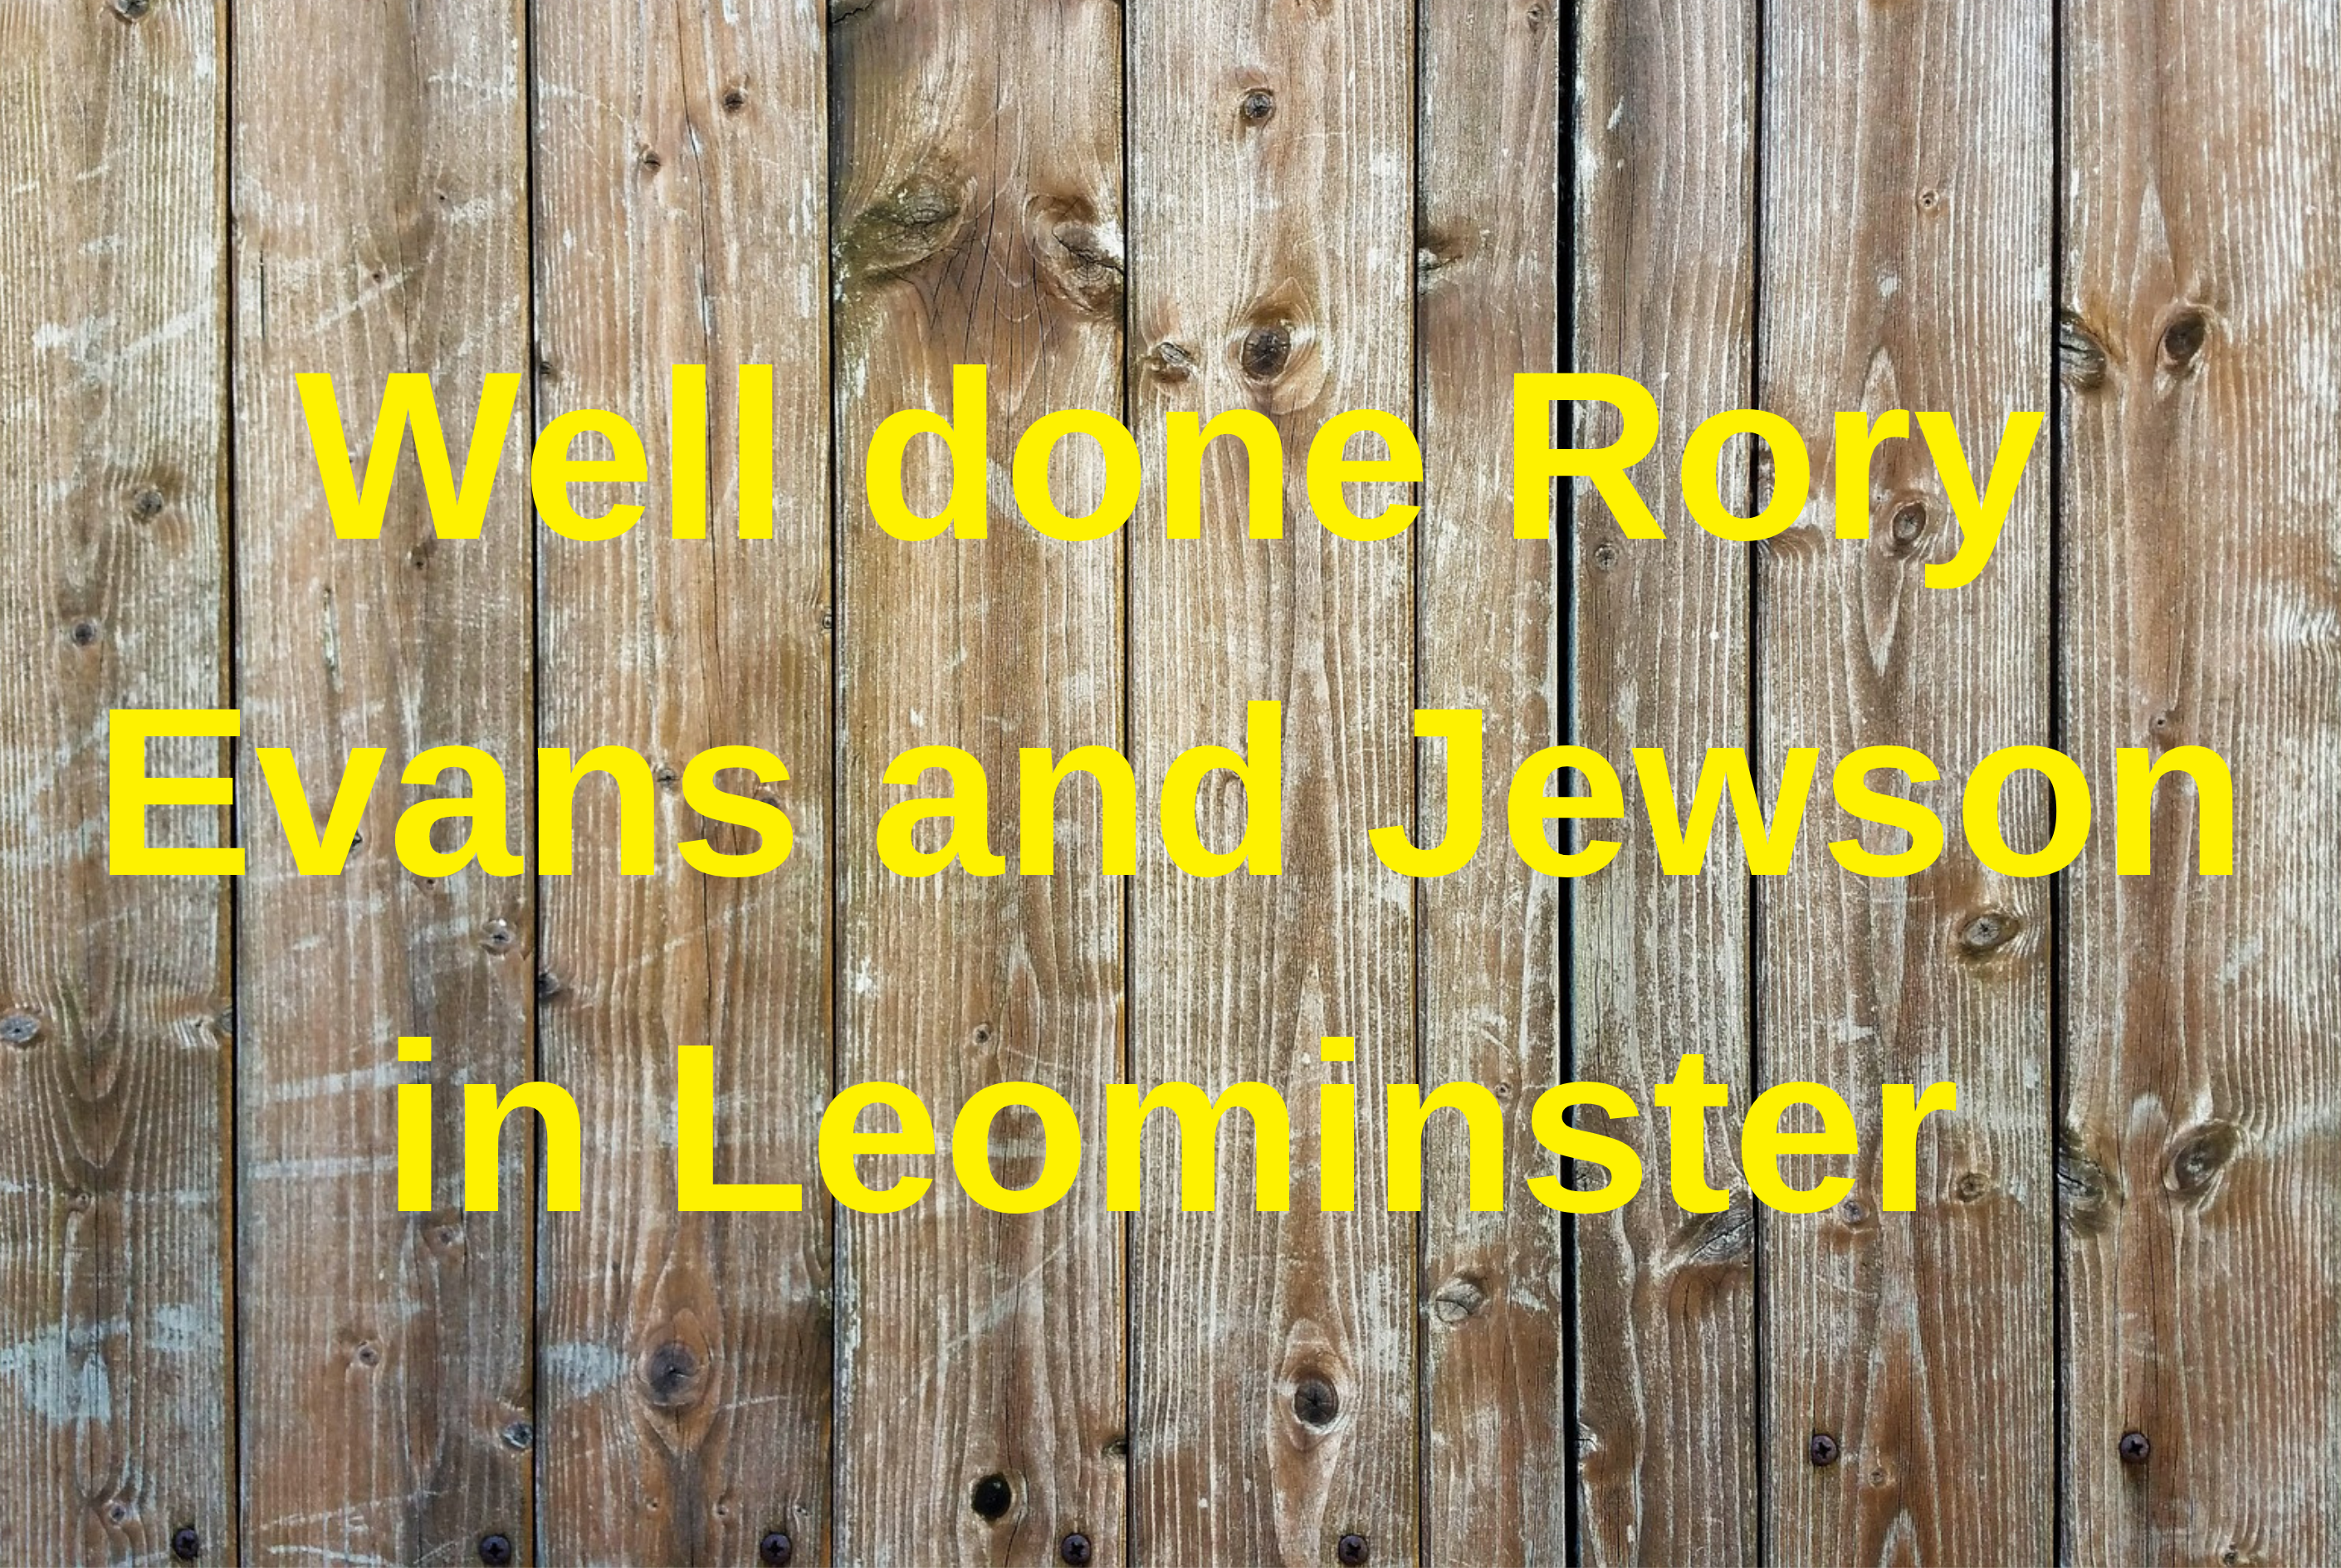 NEWS | Well done to Rory Evans and Jewson in Leominster